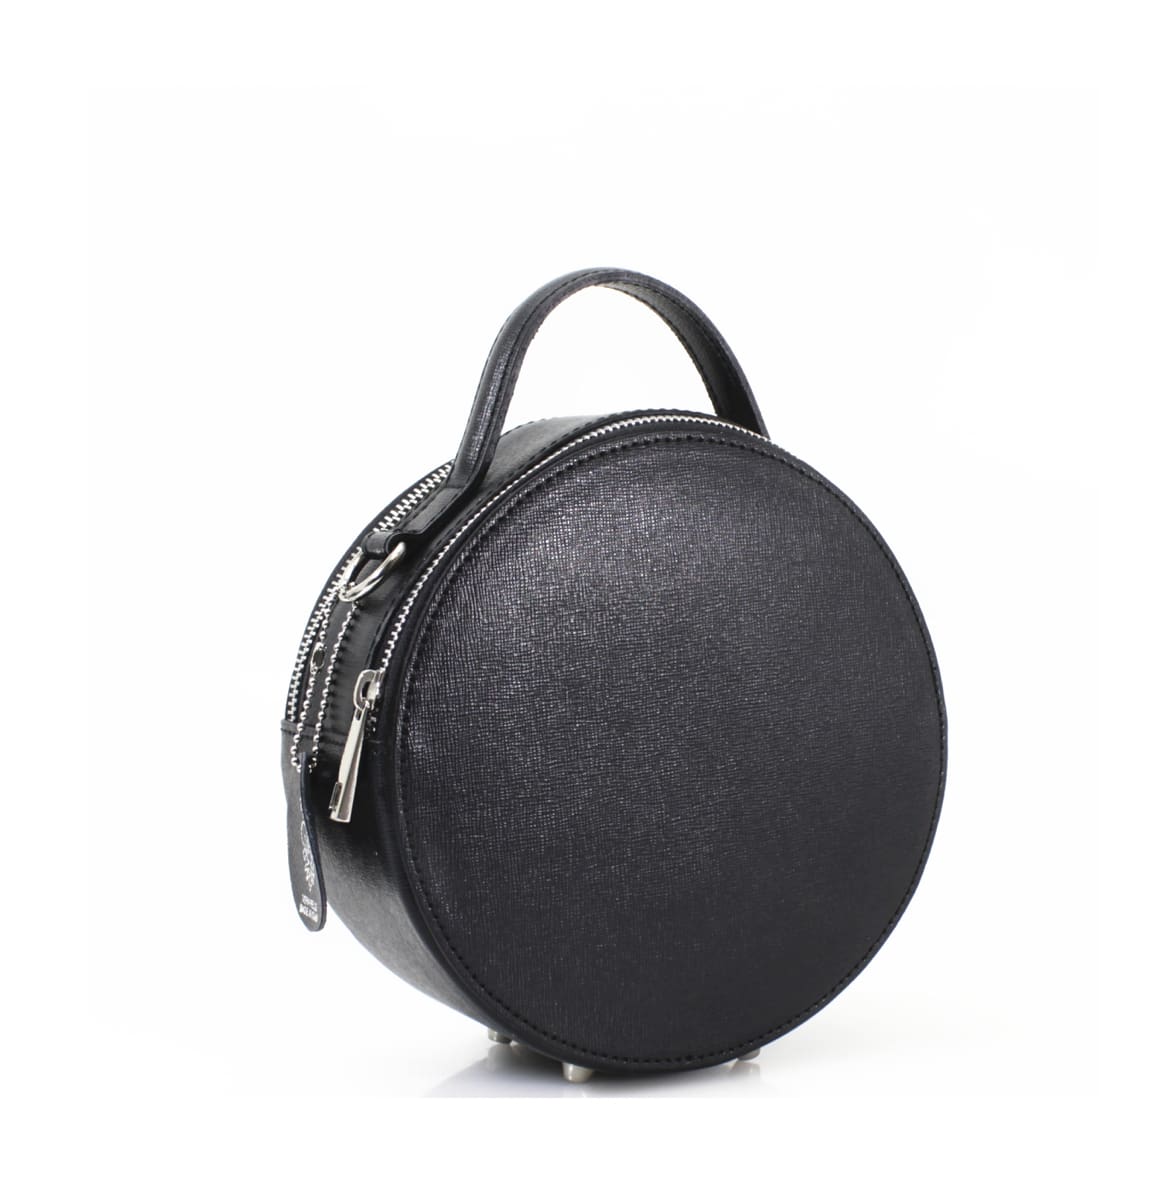 A black leather round bag on a white background.